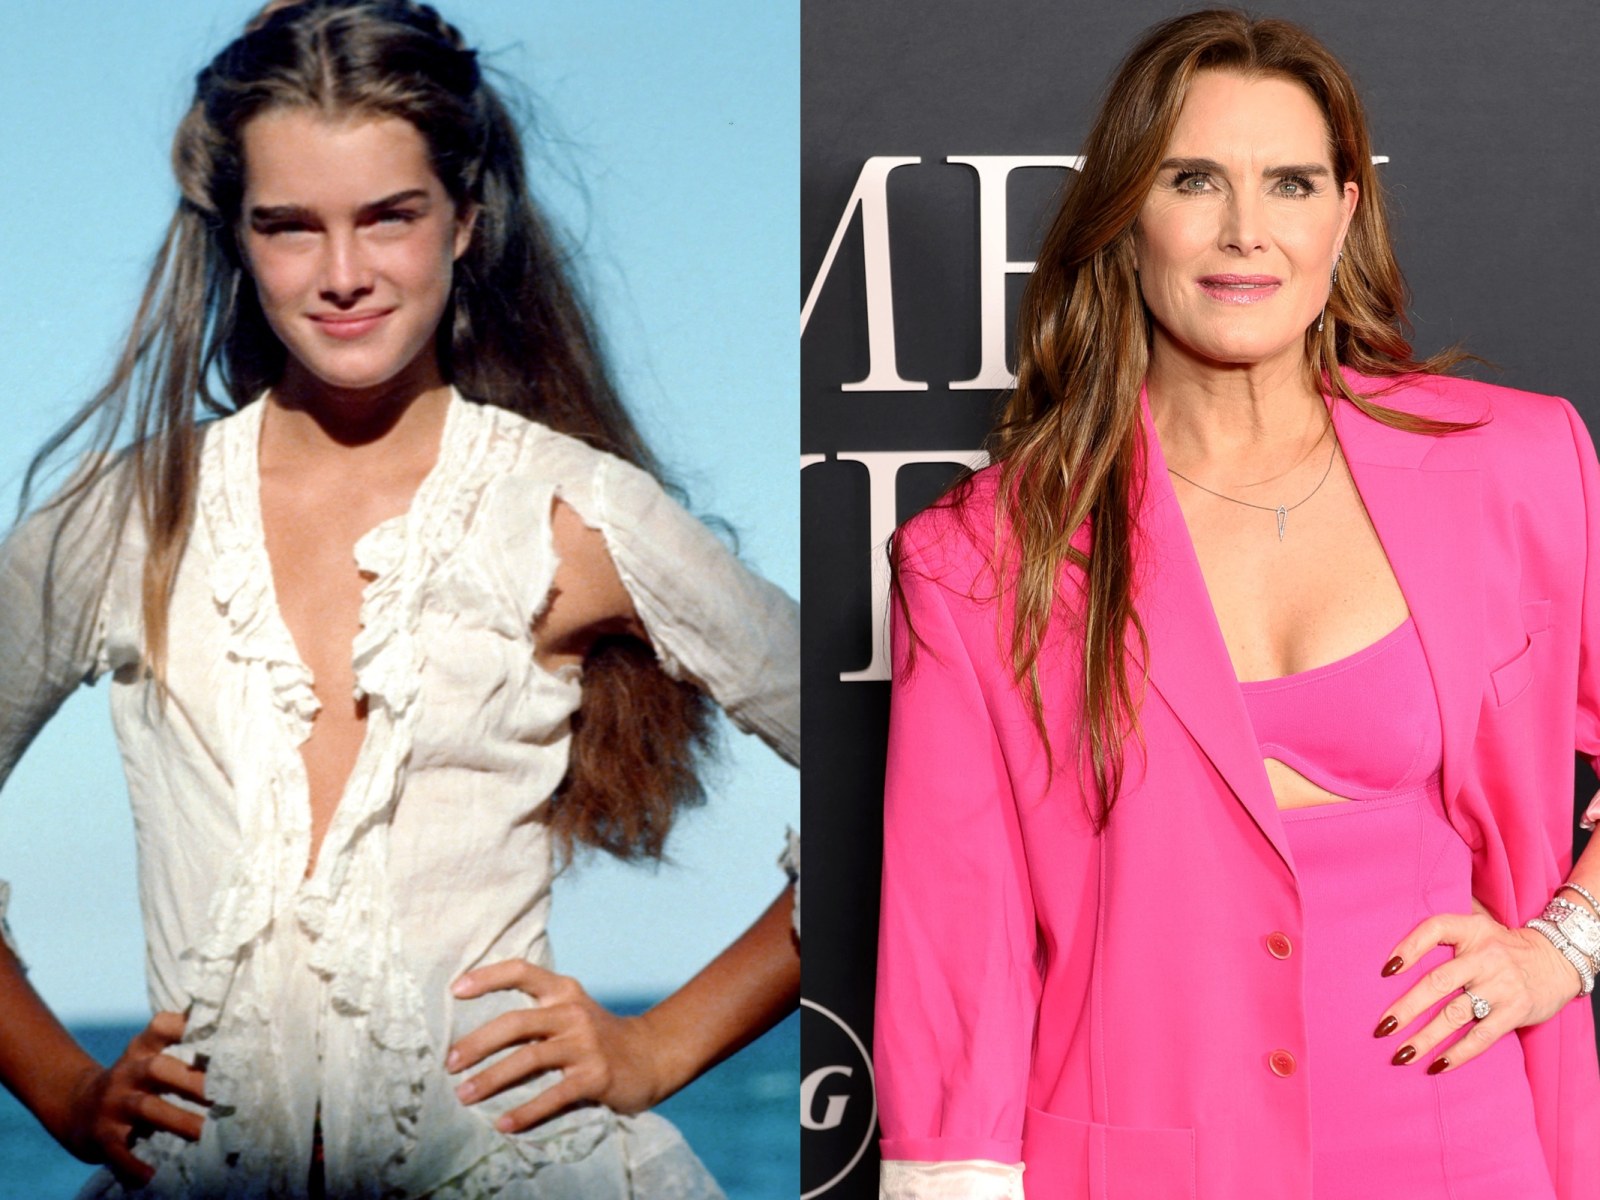 Ss All Age Nudist Naturist - Brooke Shields' Sexualization as a Child Was Staggering